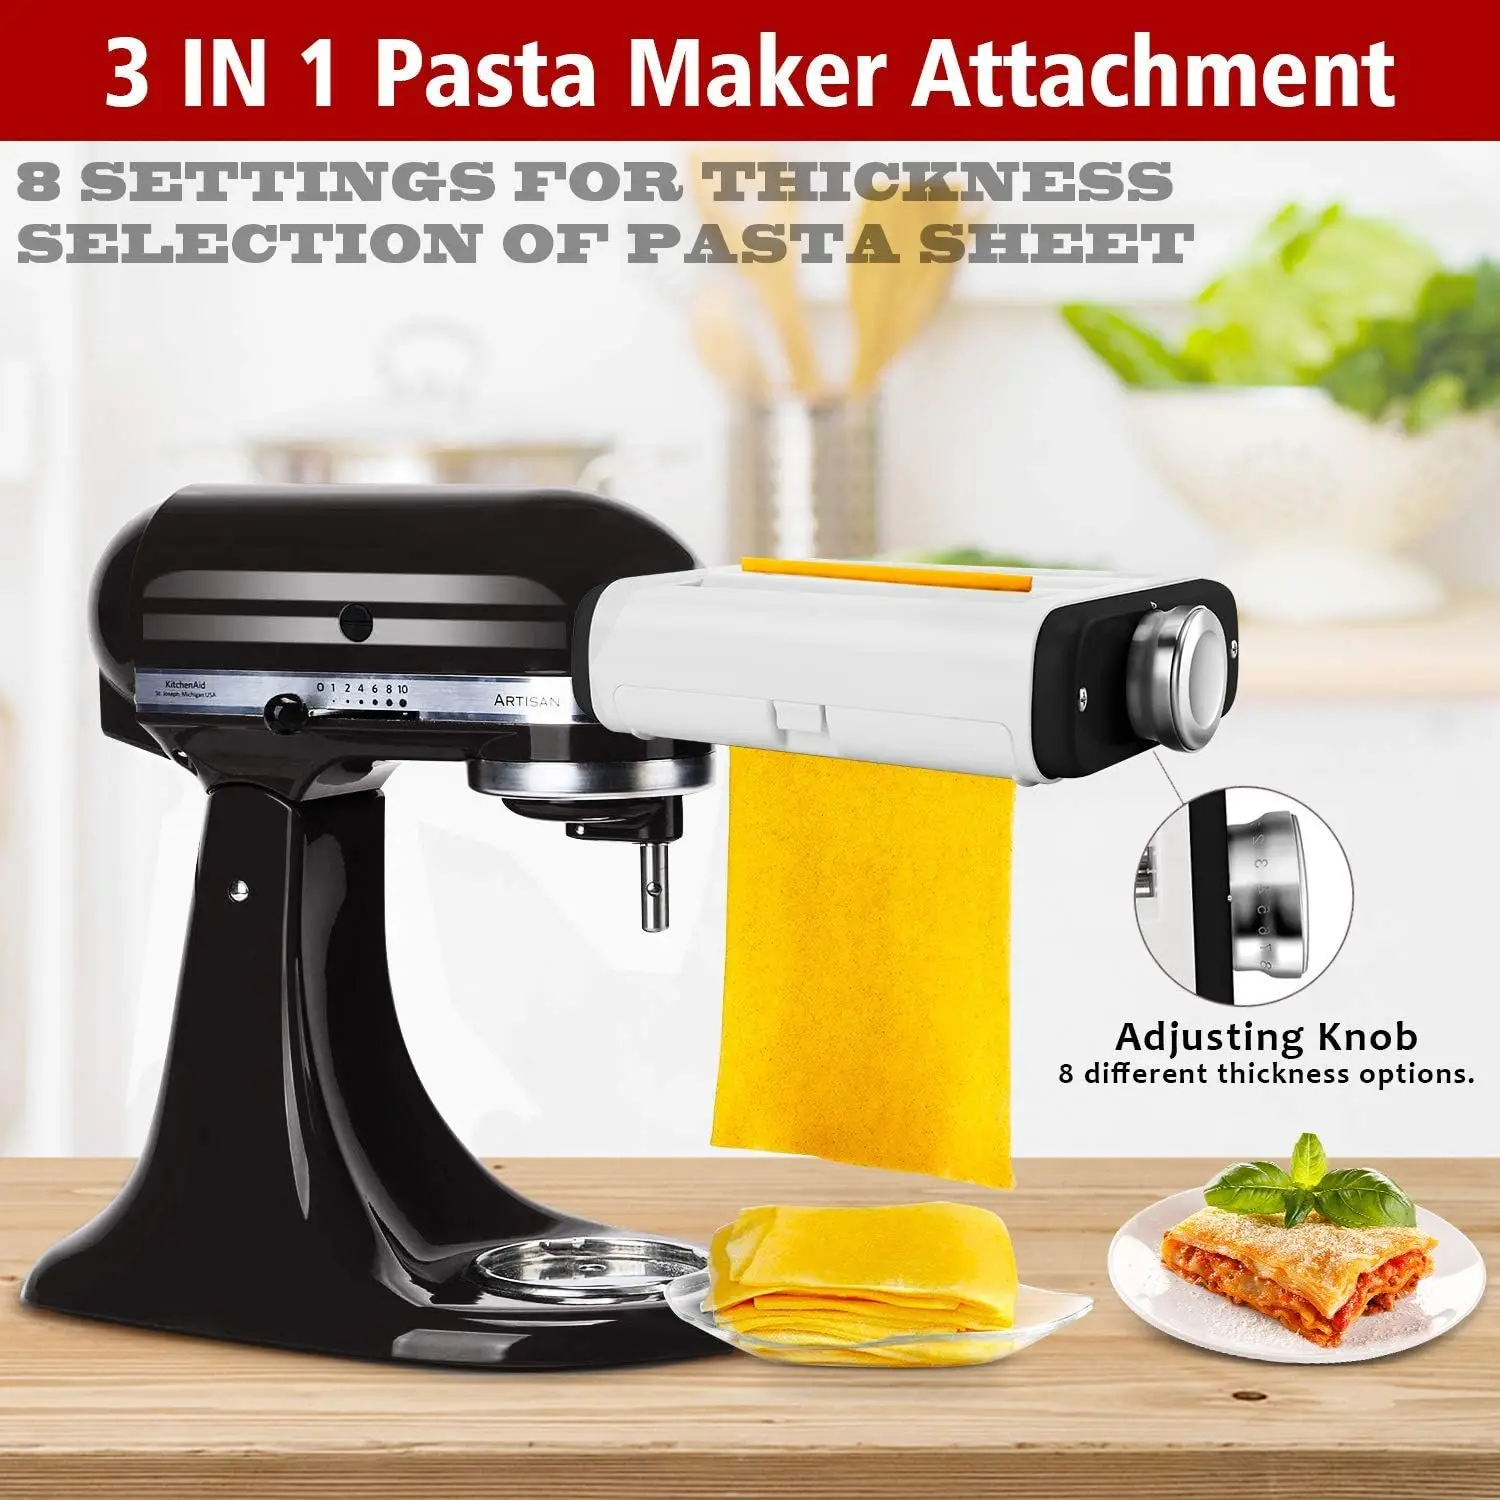 https://ae01.alicdn.com/kf/Sb8fd1d7e0c264b338cbb16a424fa0a63p/Maker-Attachment-for-All-Mixers-Noodle-Ravioli-Maker-Kitchen-Aid-Mixer-Accessories-3-In-1-Including.jpg